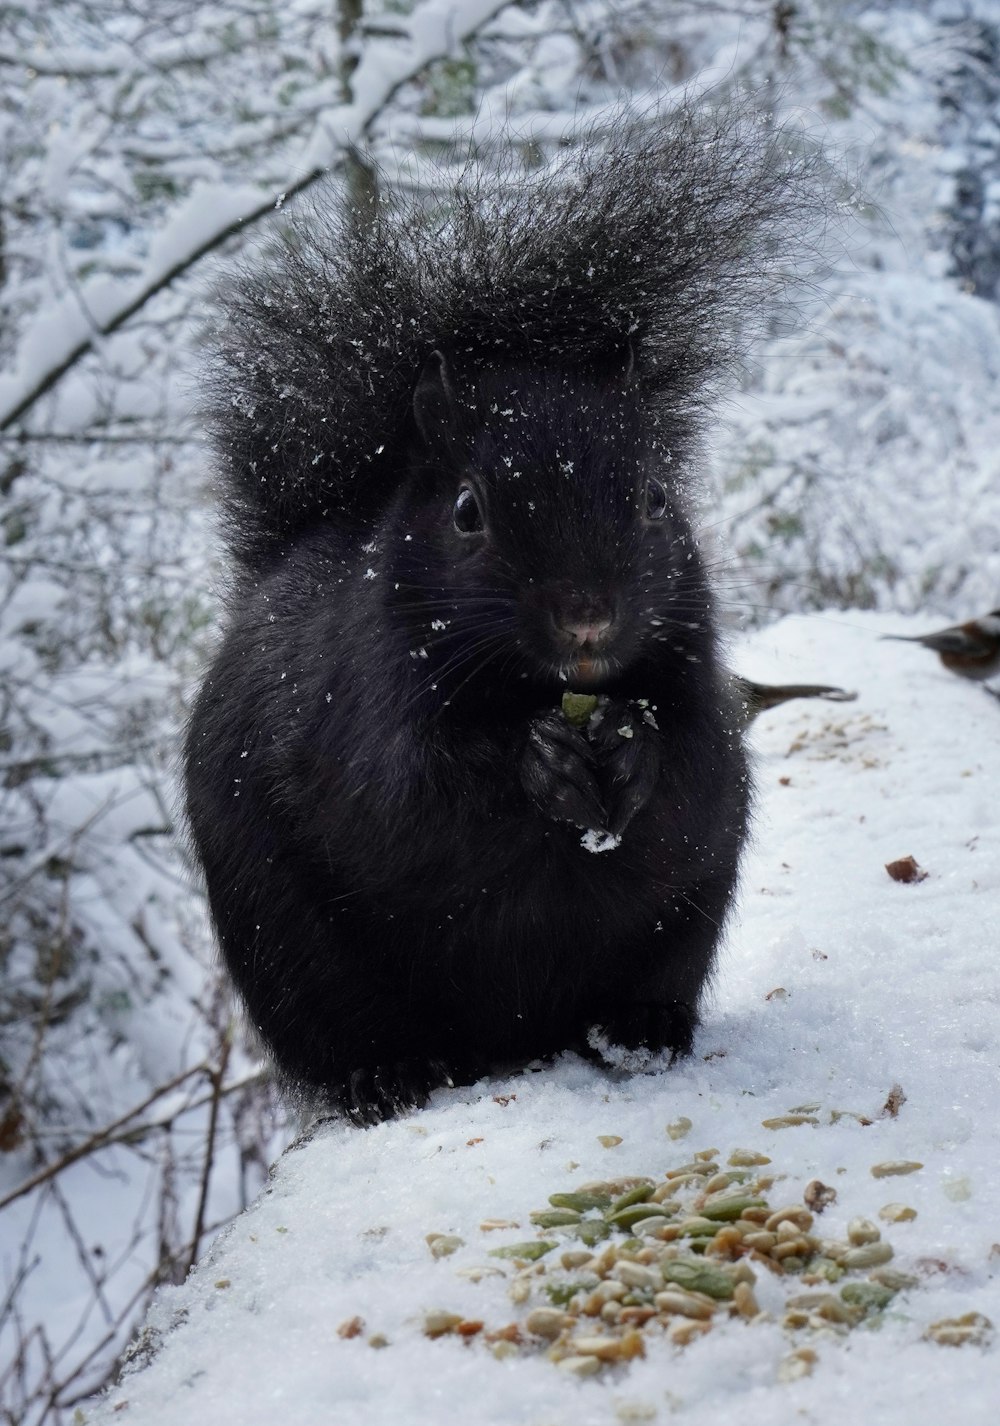 a black squirrel eating a piece of food in the snow